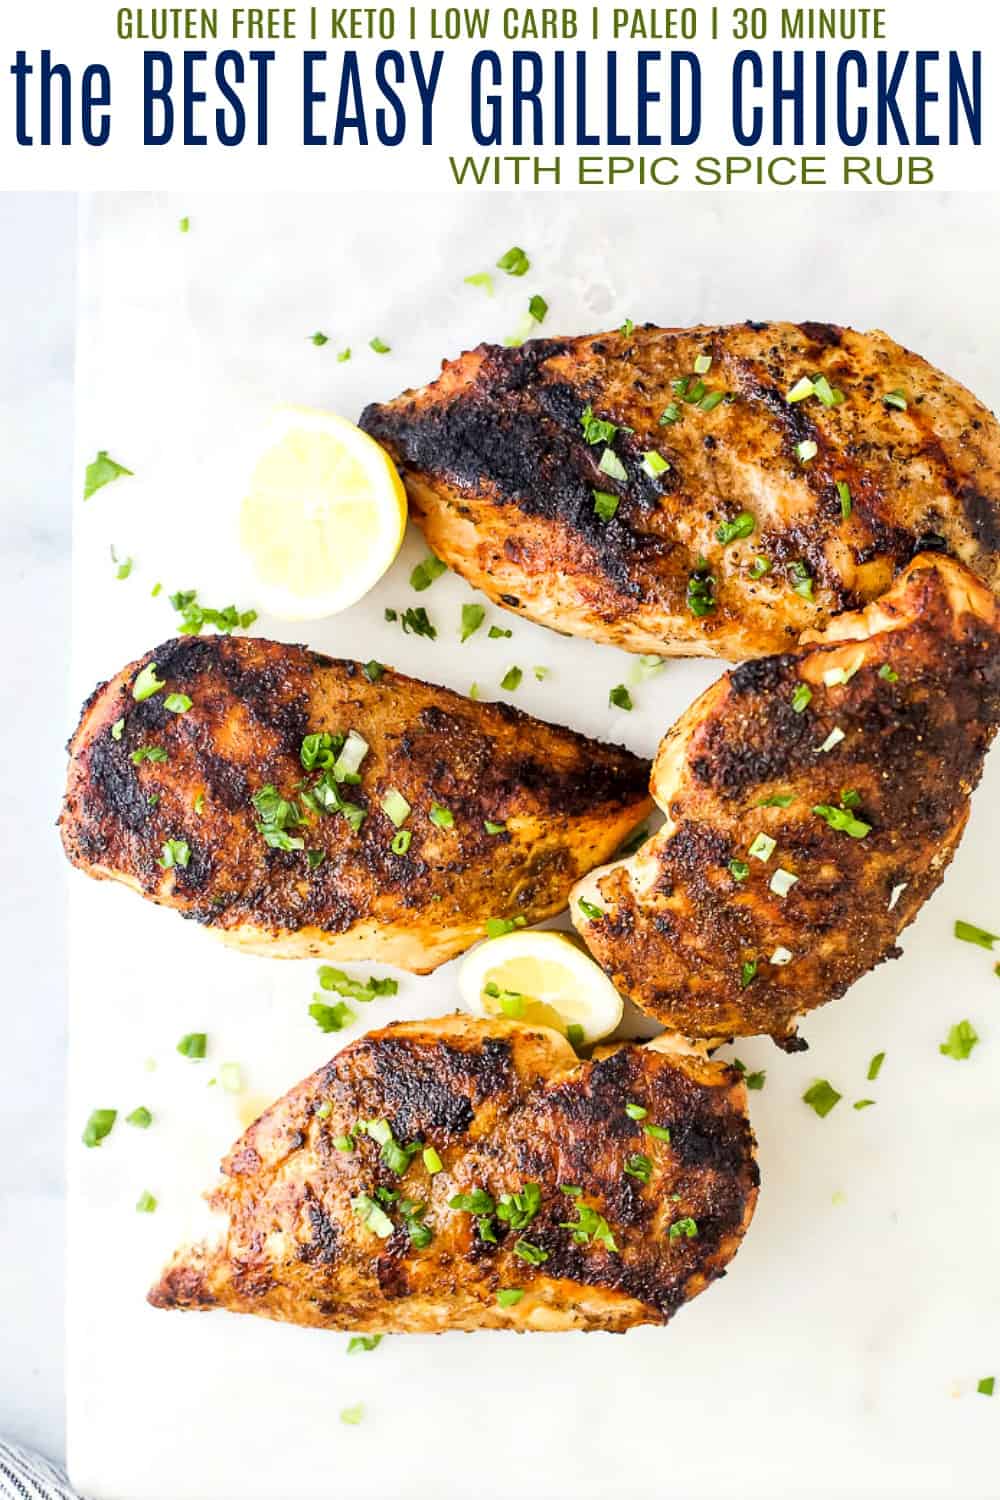 Juicy Grilled Chicken Breast With Homemade Spice Rub Easy Recipe